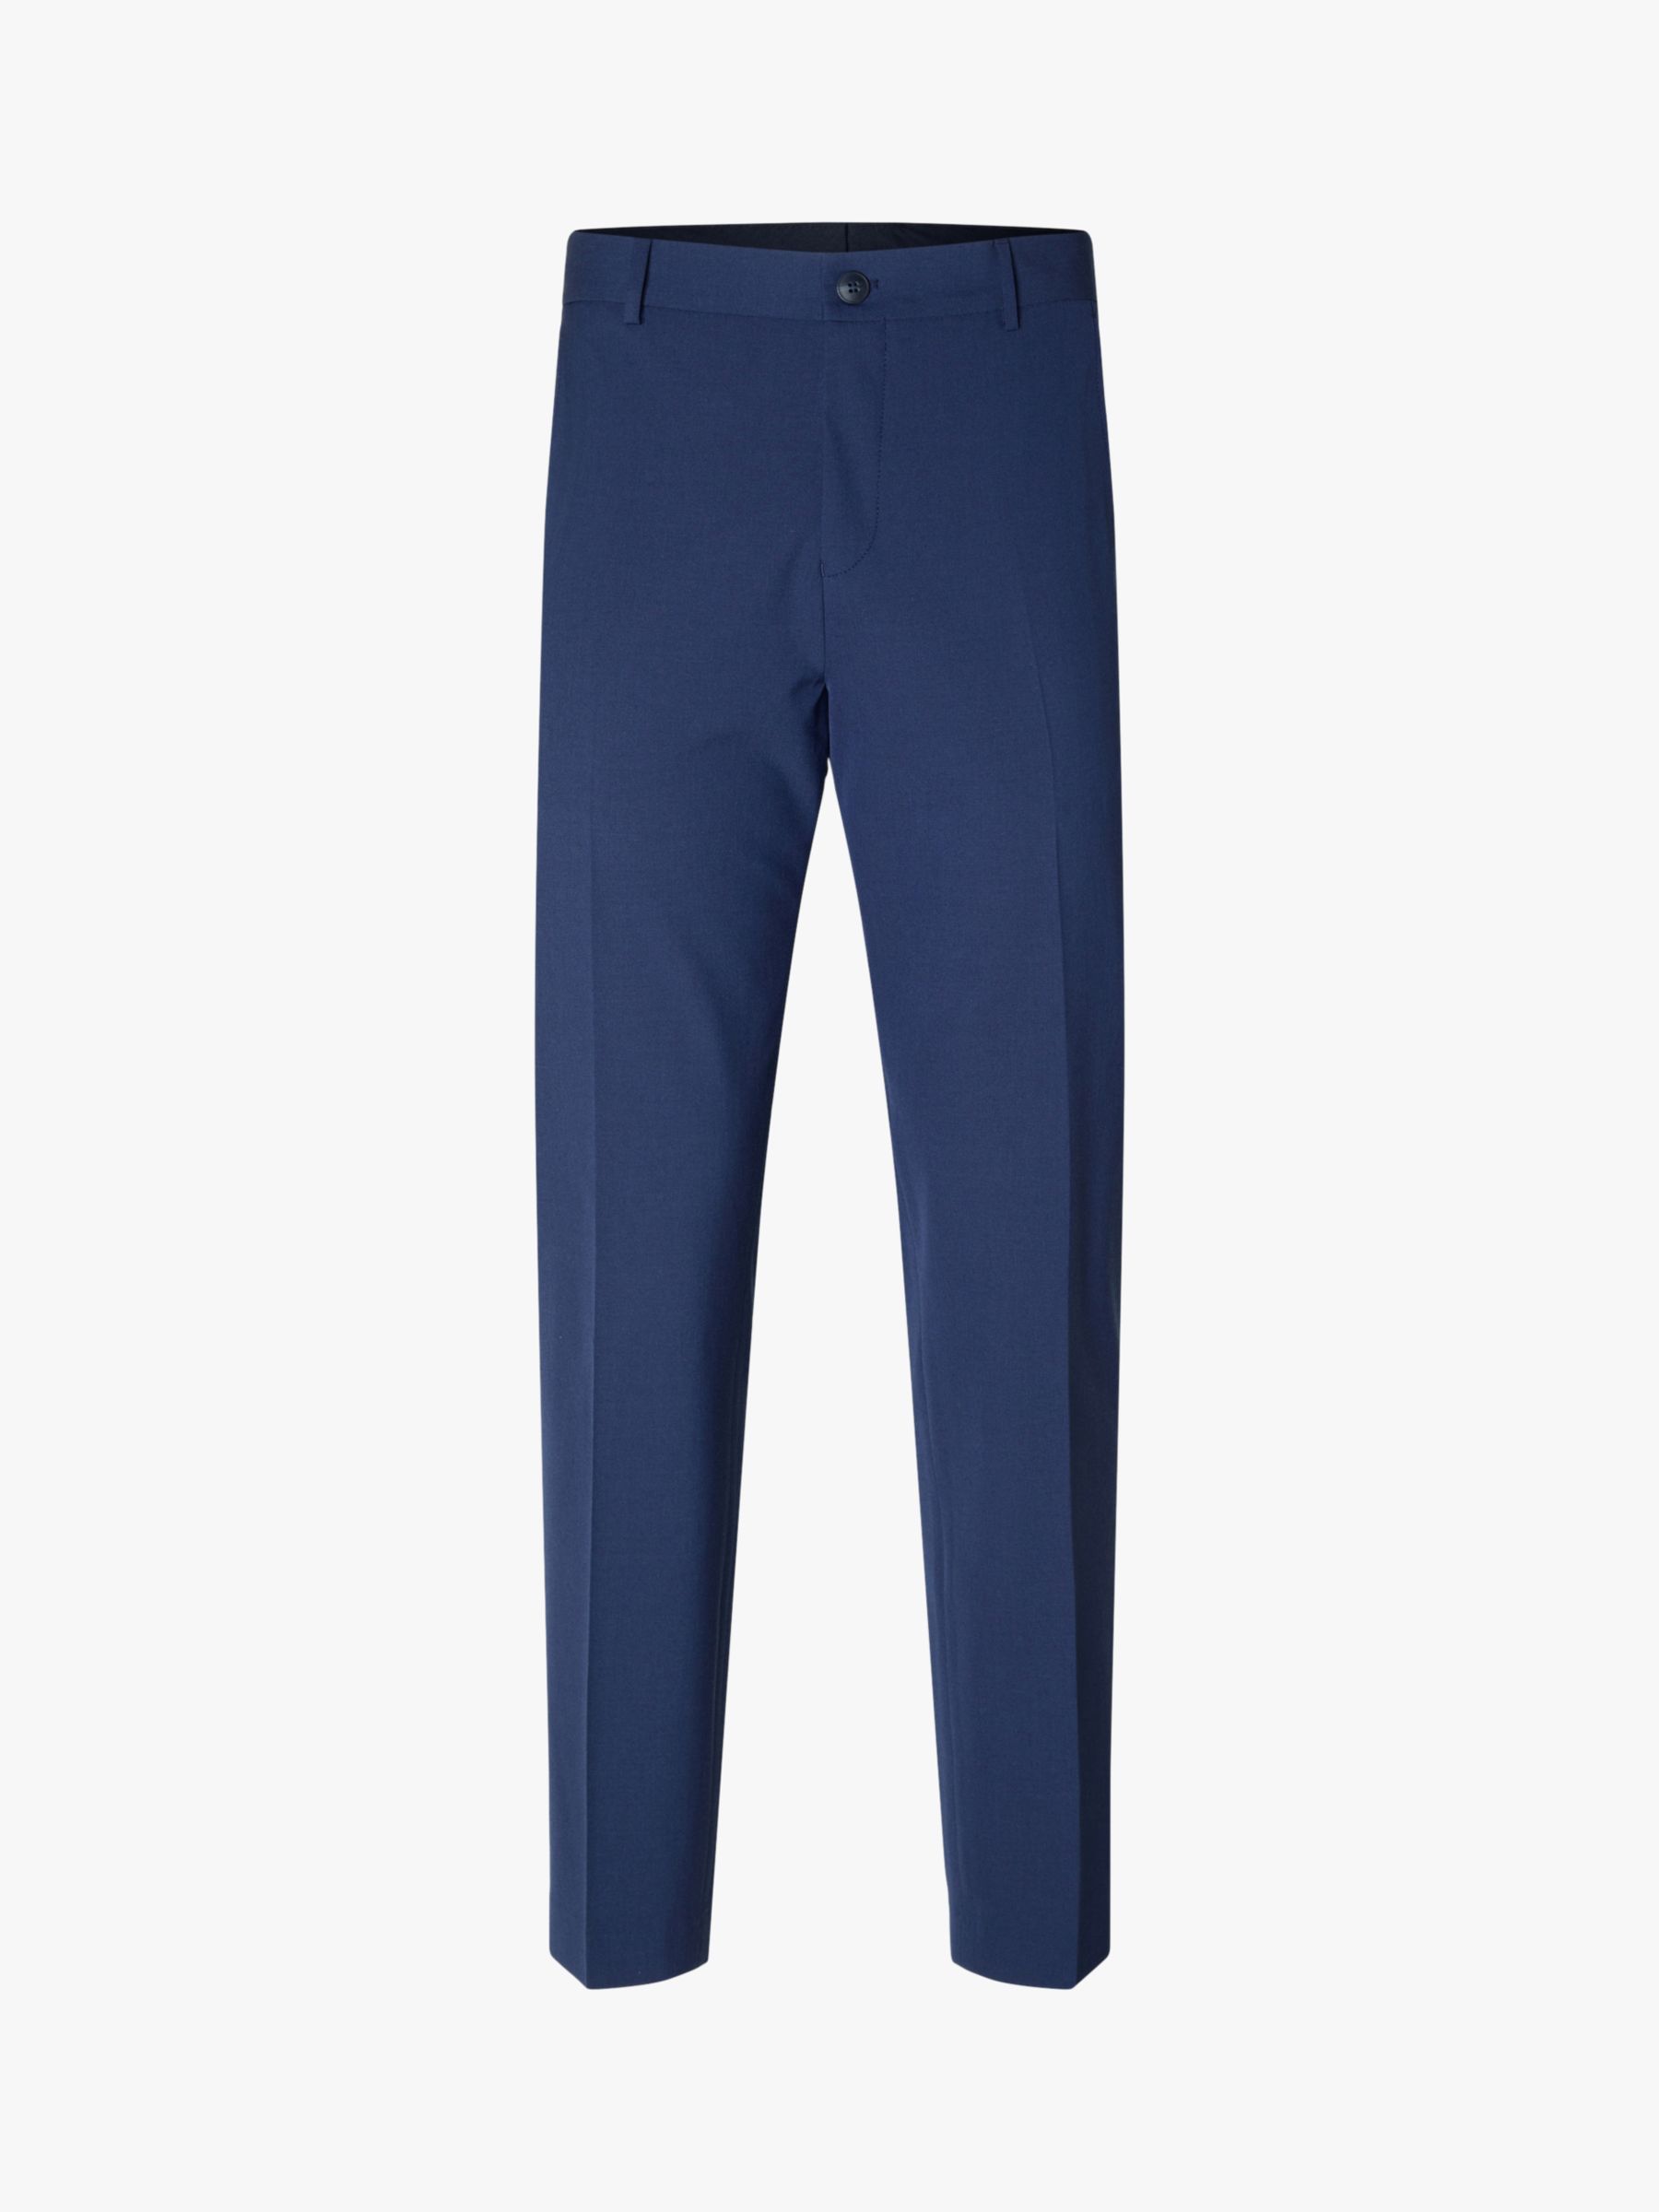 SELECTED HOMME Liam Tailored Trousers, Blue, 30R